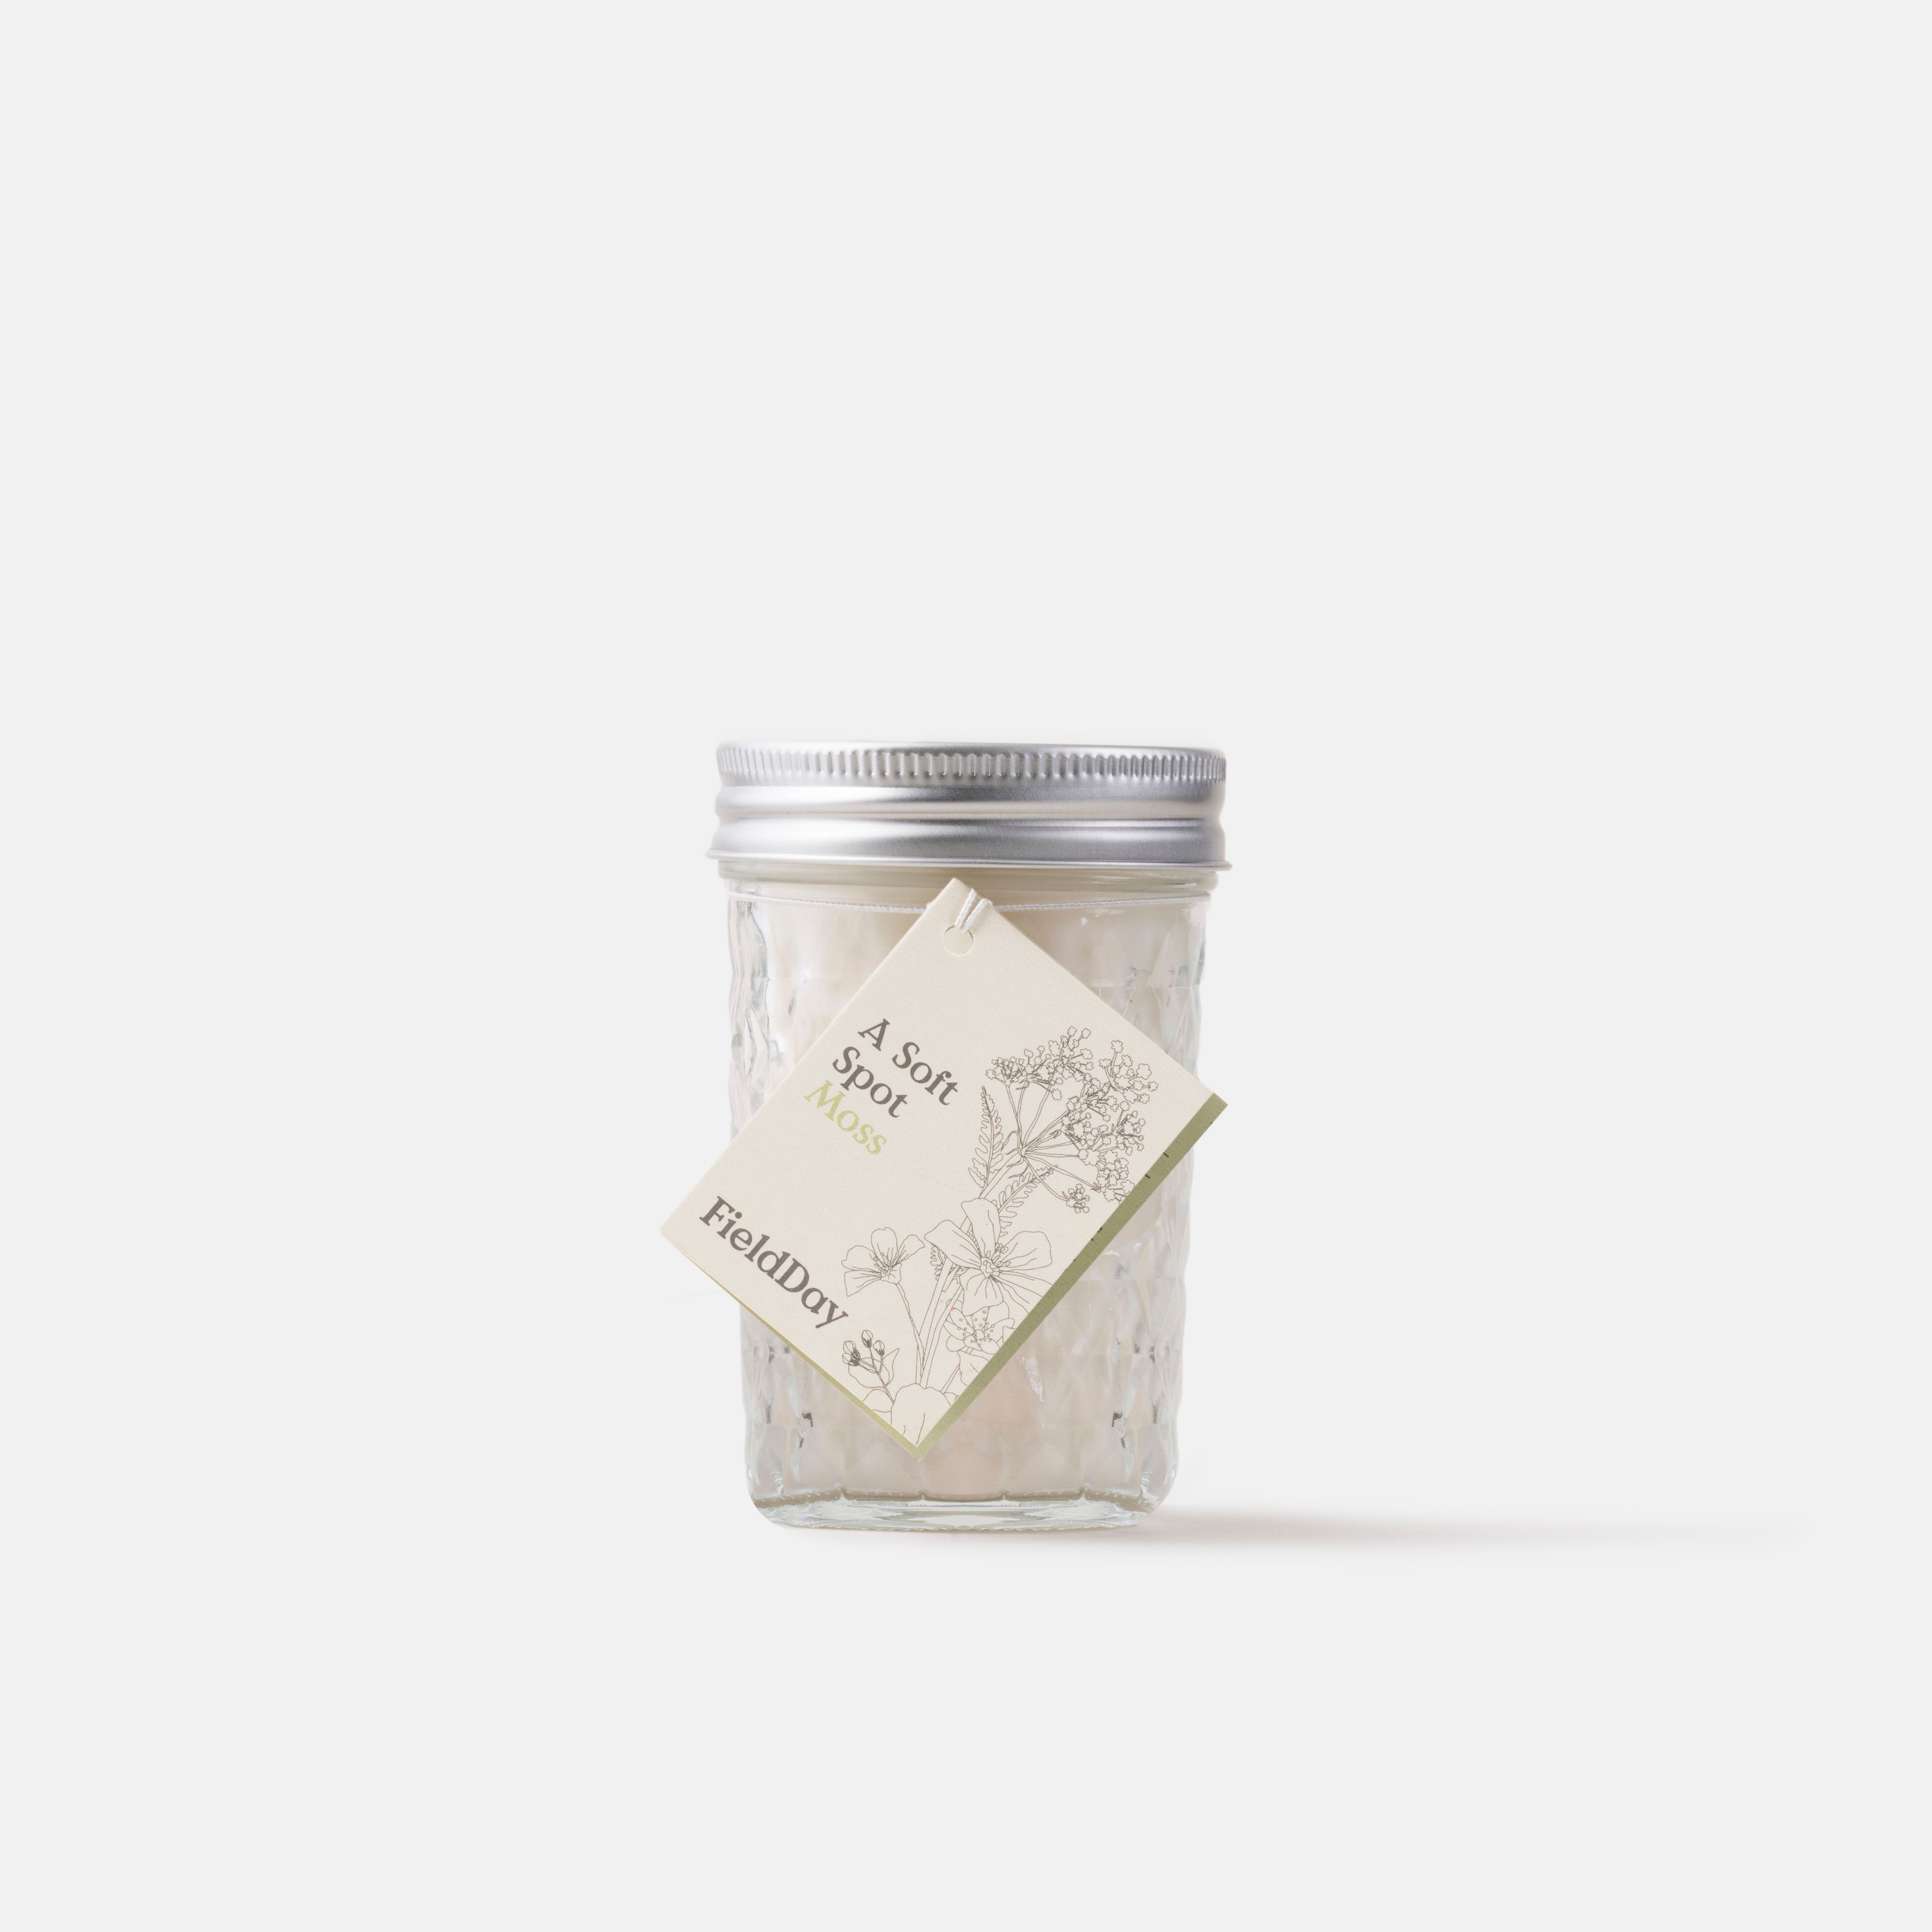 Field Day Candle | Moss Jam Jar Candle 